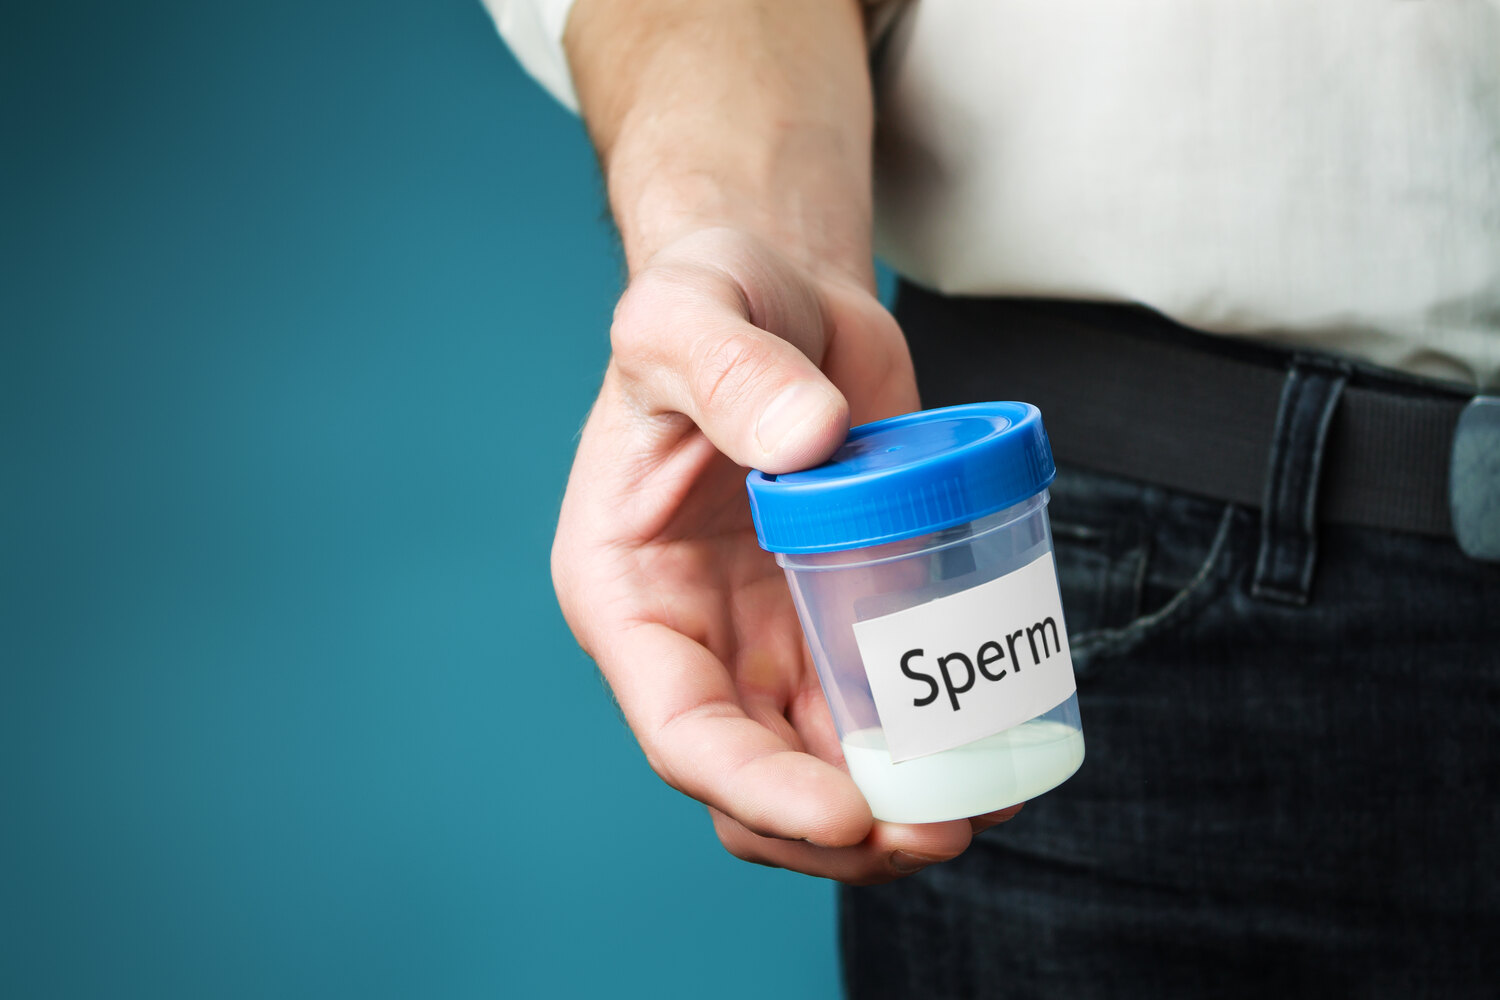 who can opt for sperm freezing